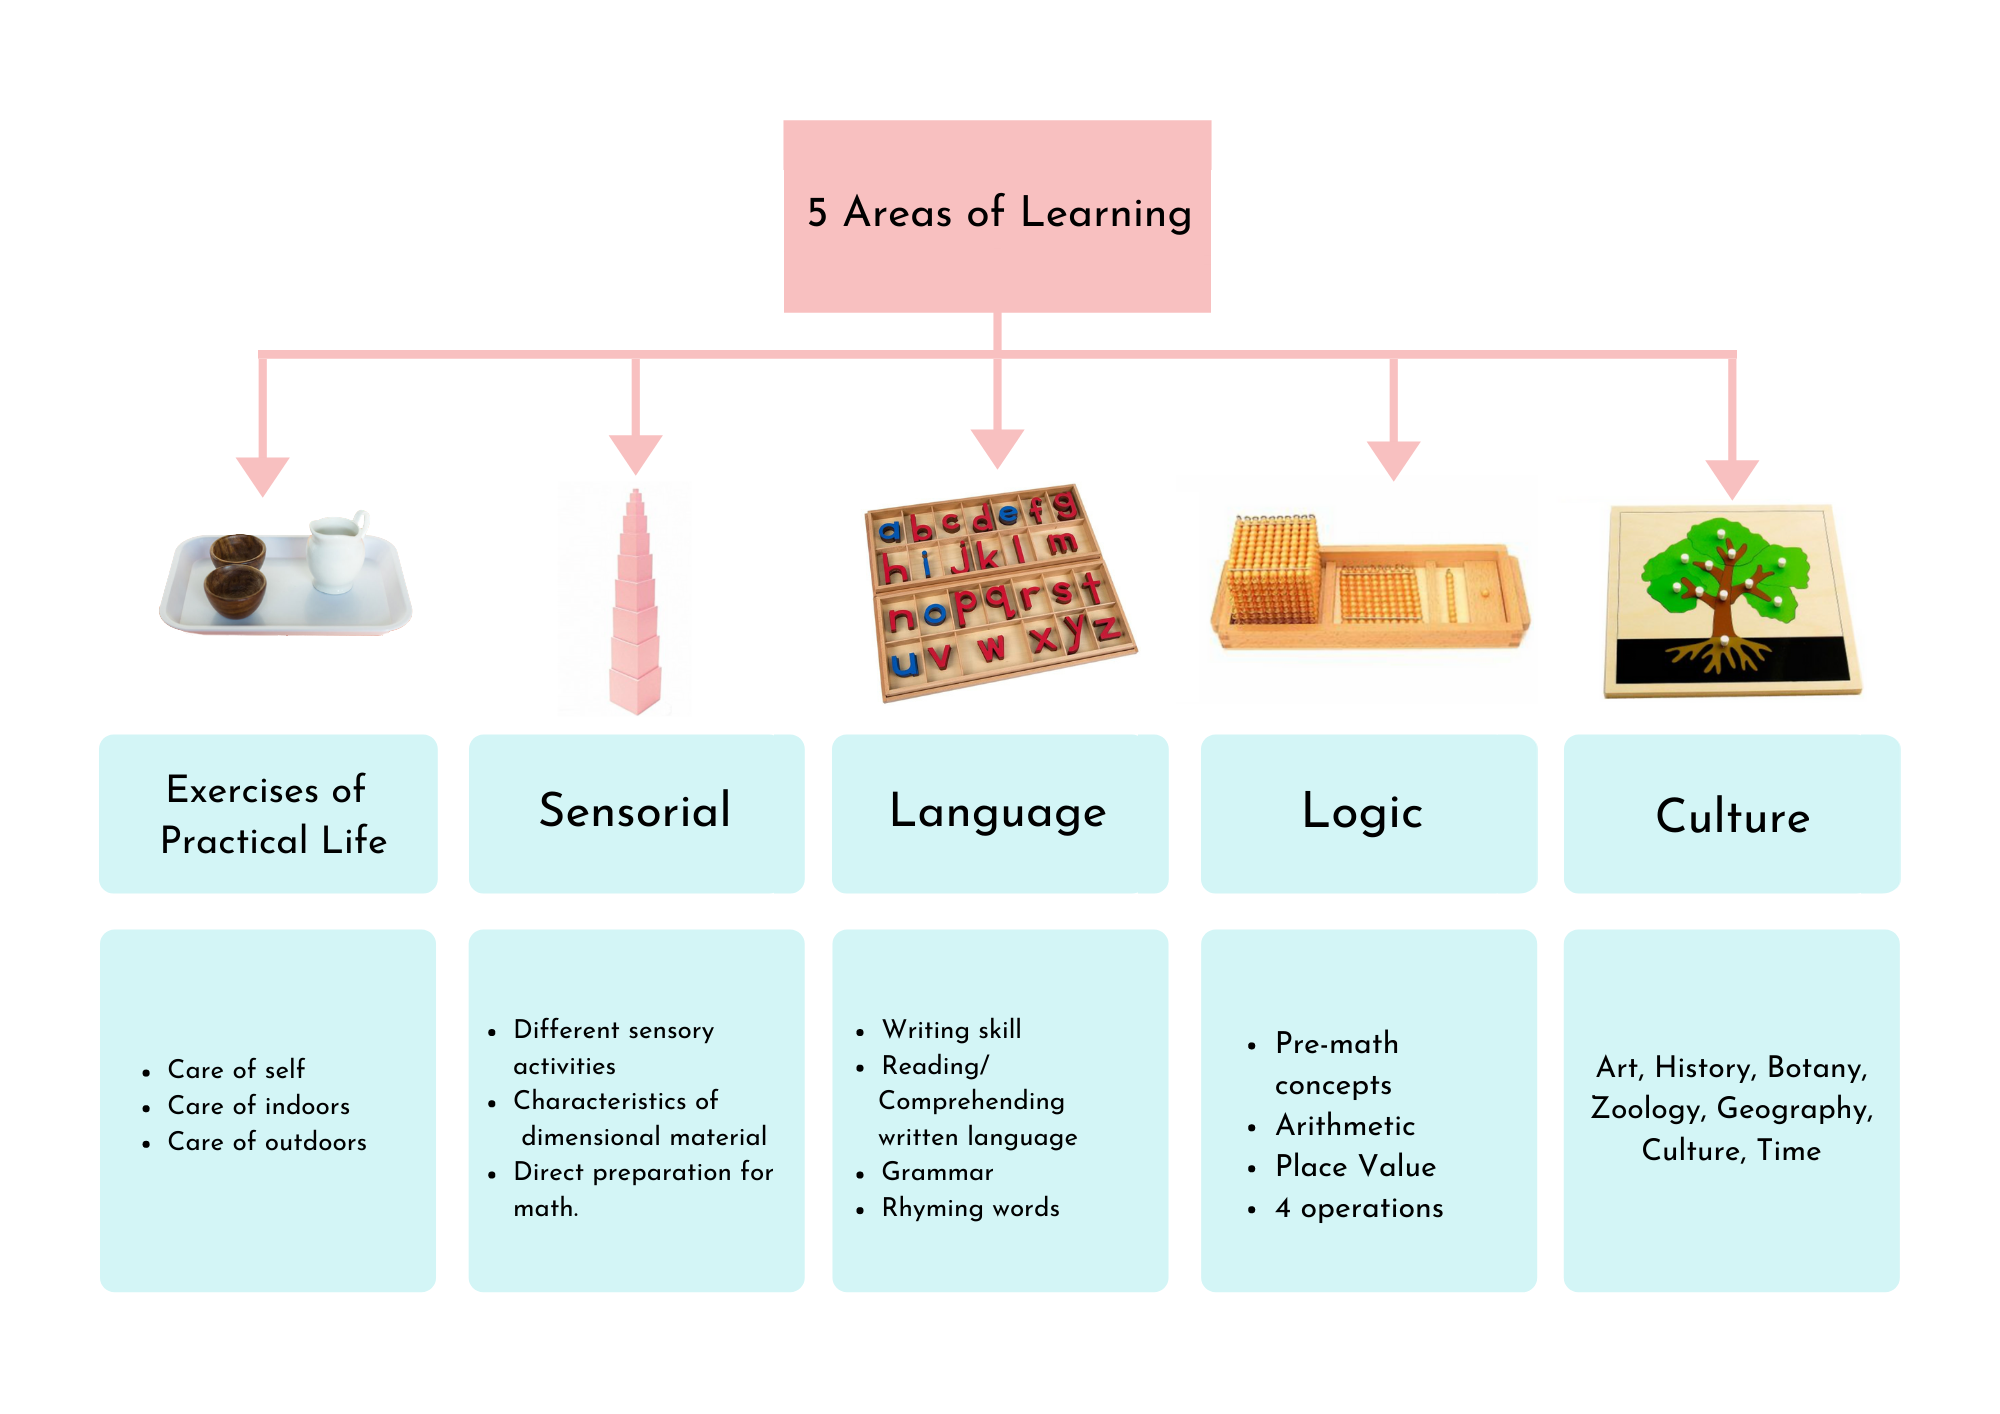 5 Areas of Learning